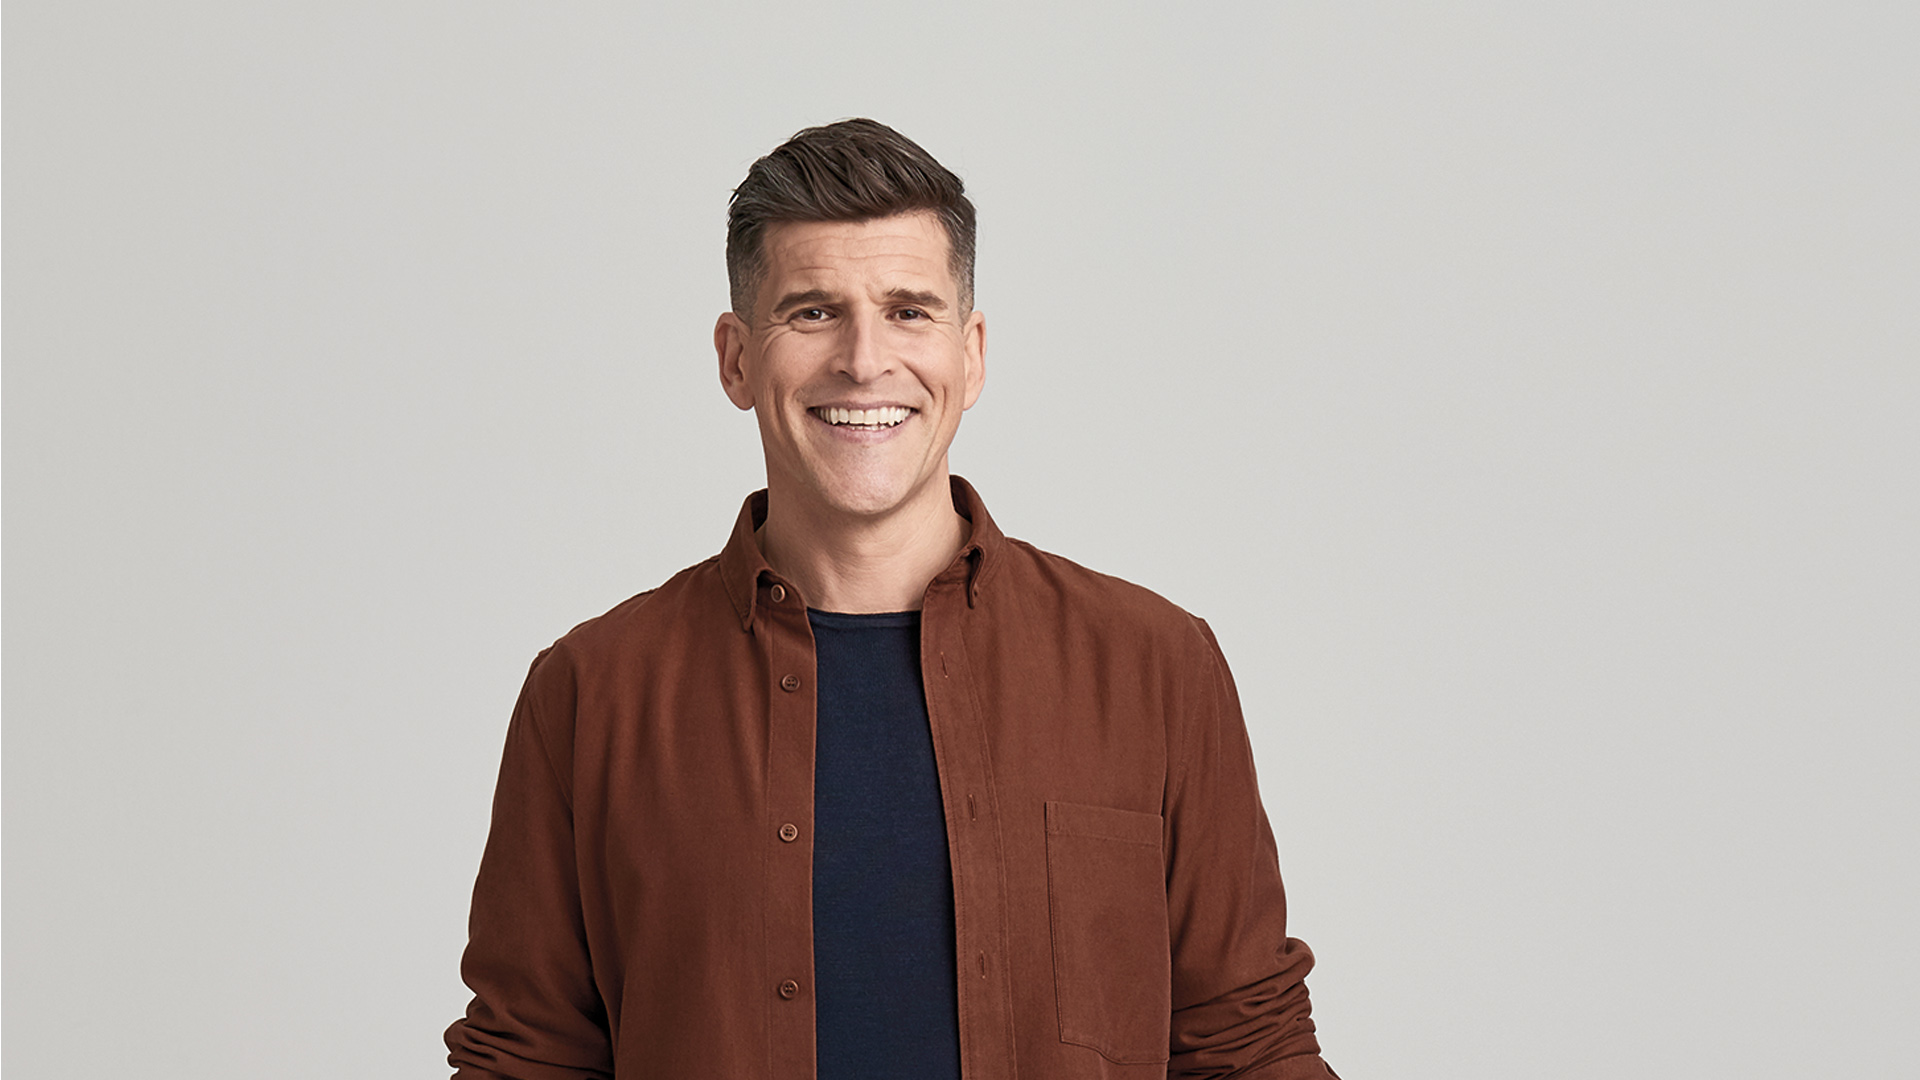 TV host Osher Gunsberg gets candid about his coeliac disease journey and overcoming mental health struggles